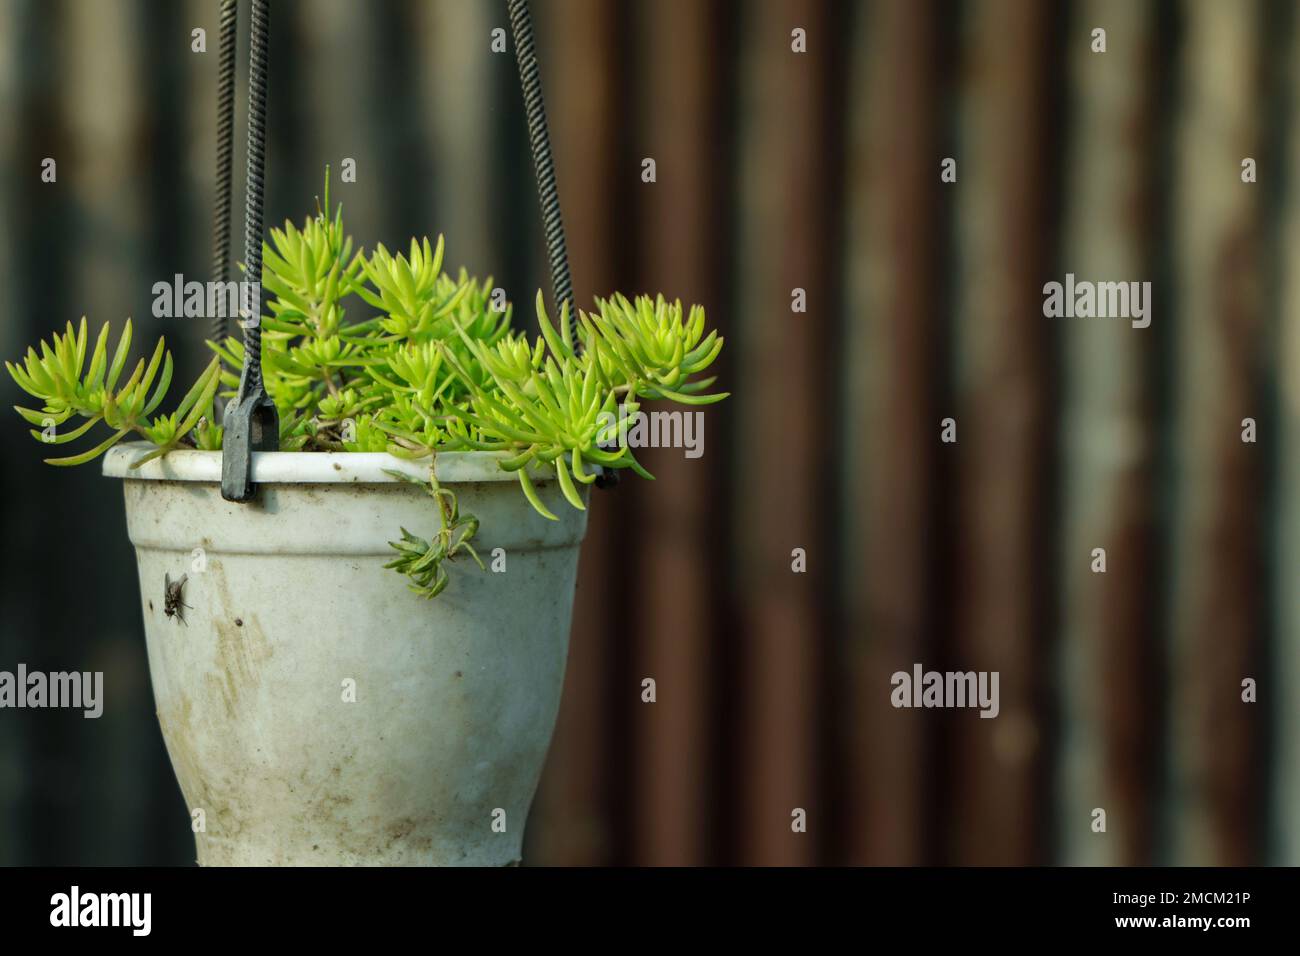 Sedum or Stonecrop plant in a plastic pot hanging on a garden Stock Photo